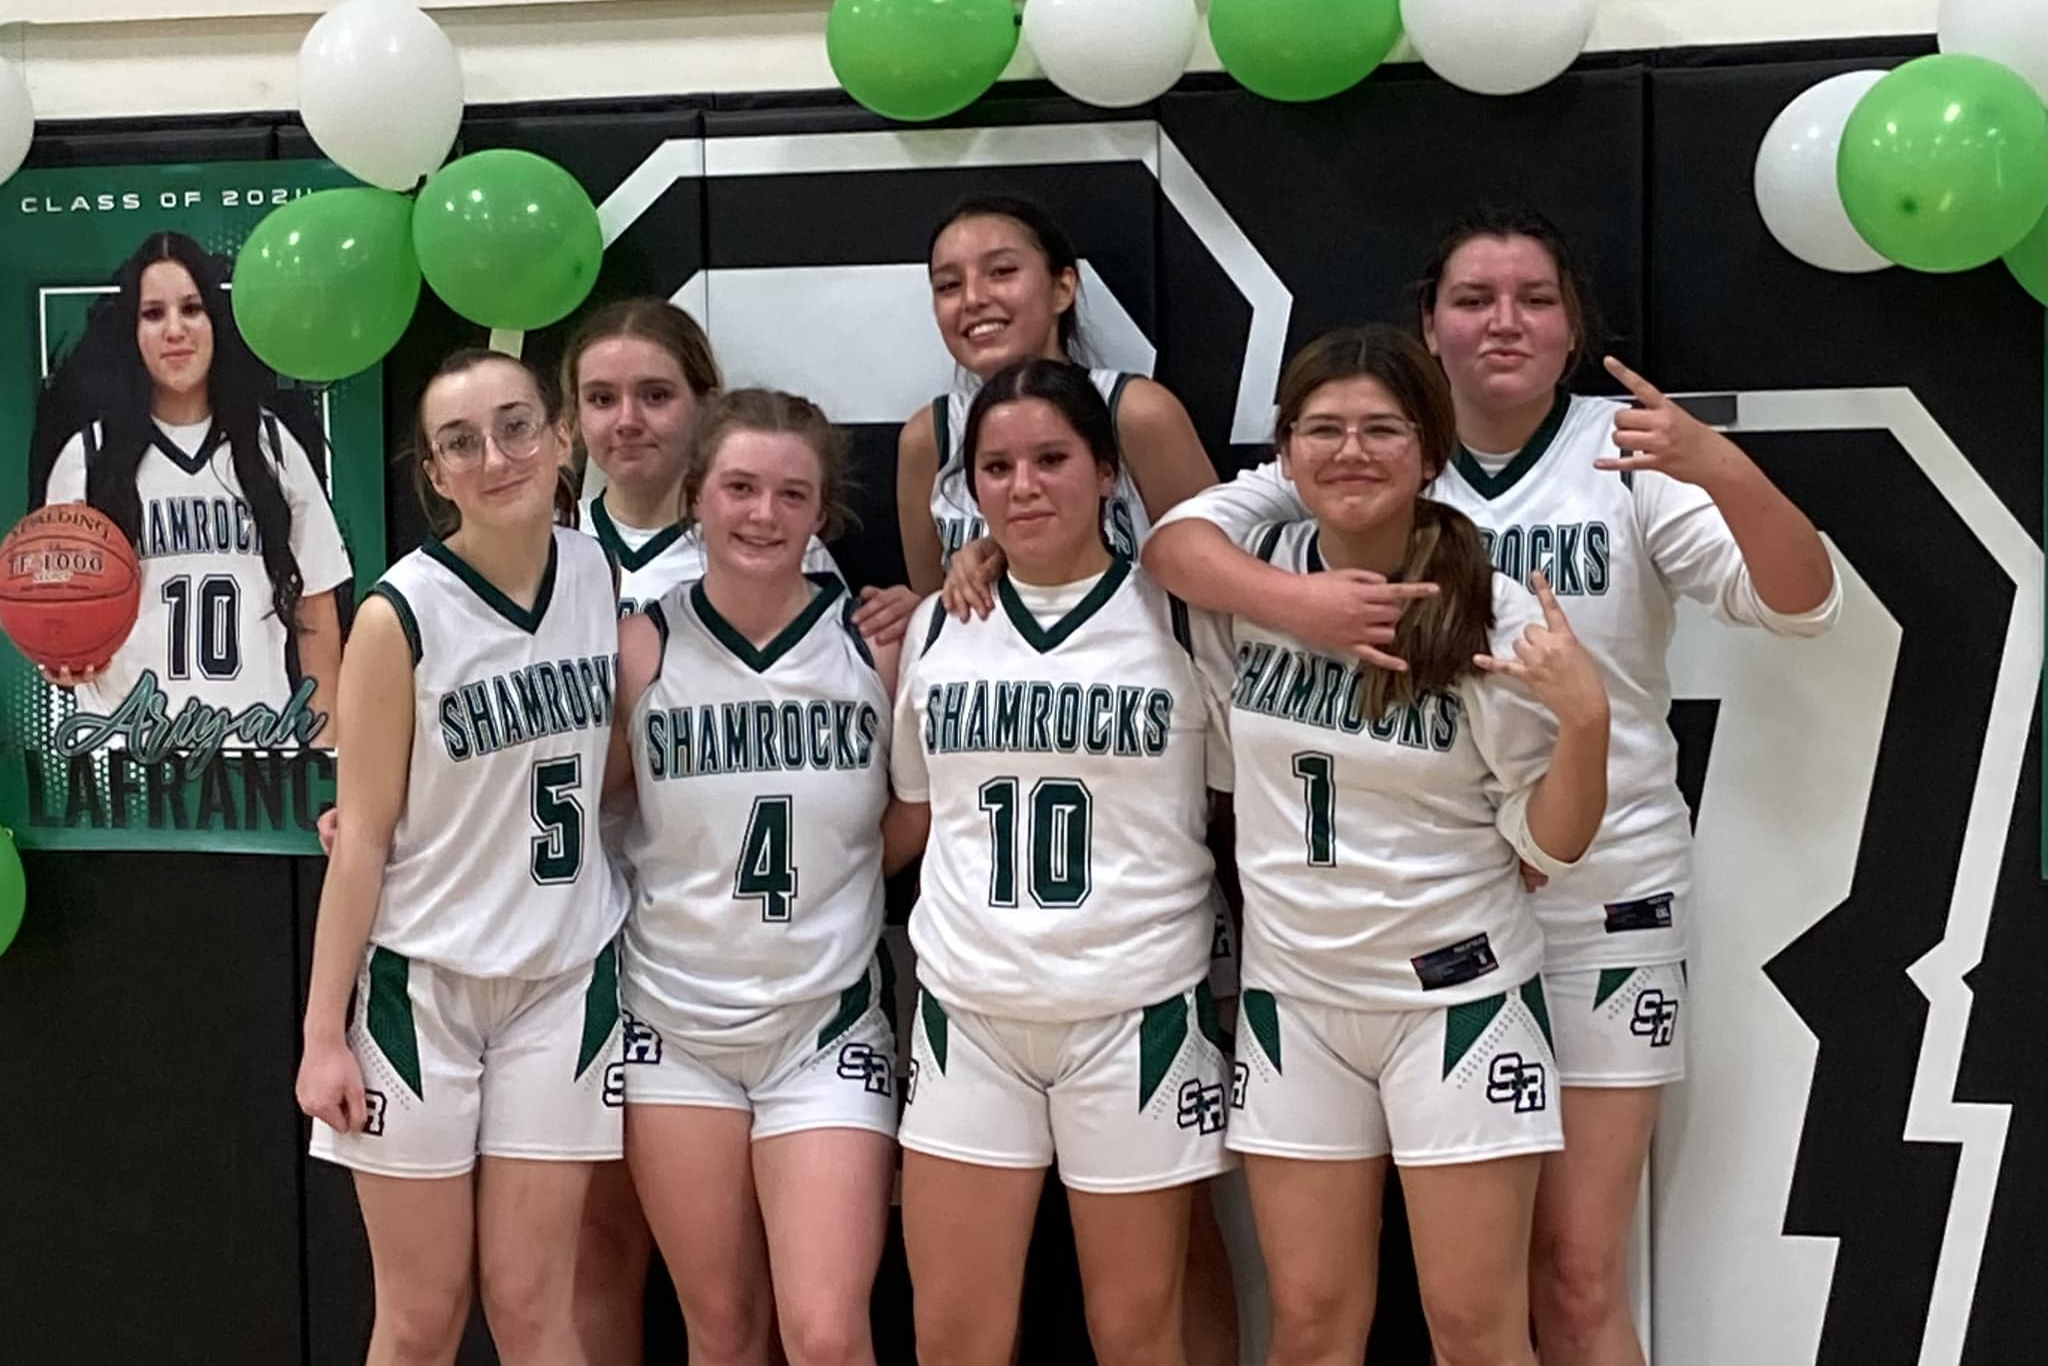 Seven high school athletes pose together with green and white a balloons